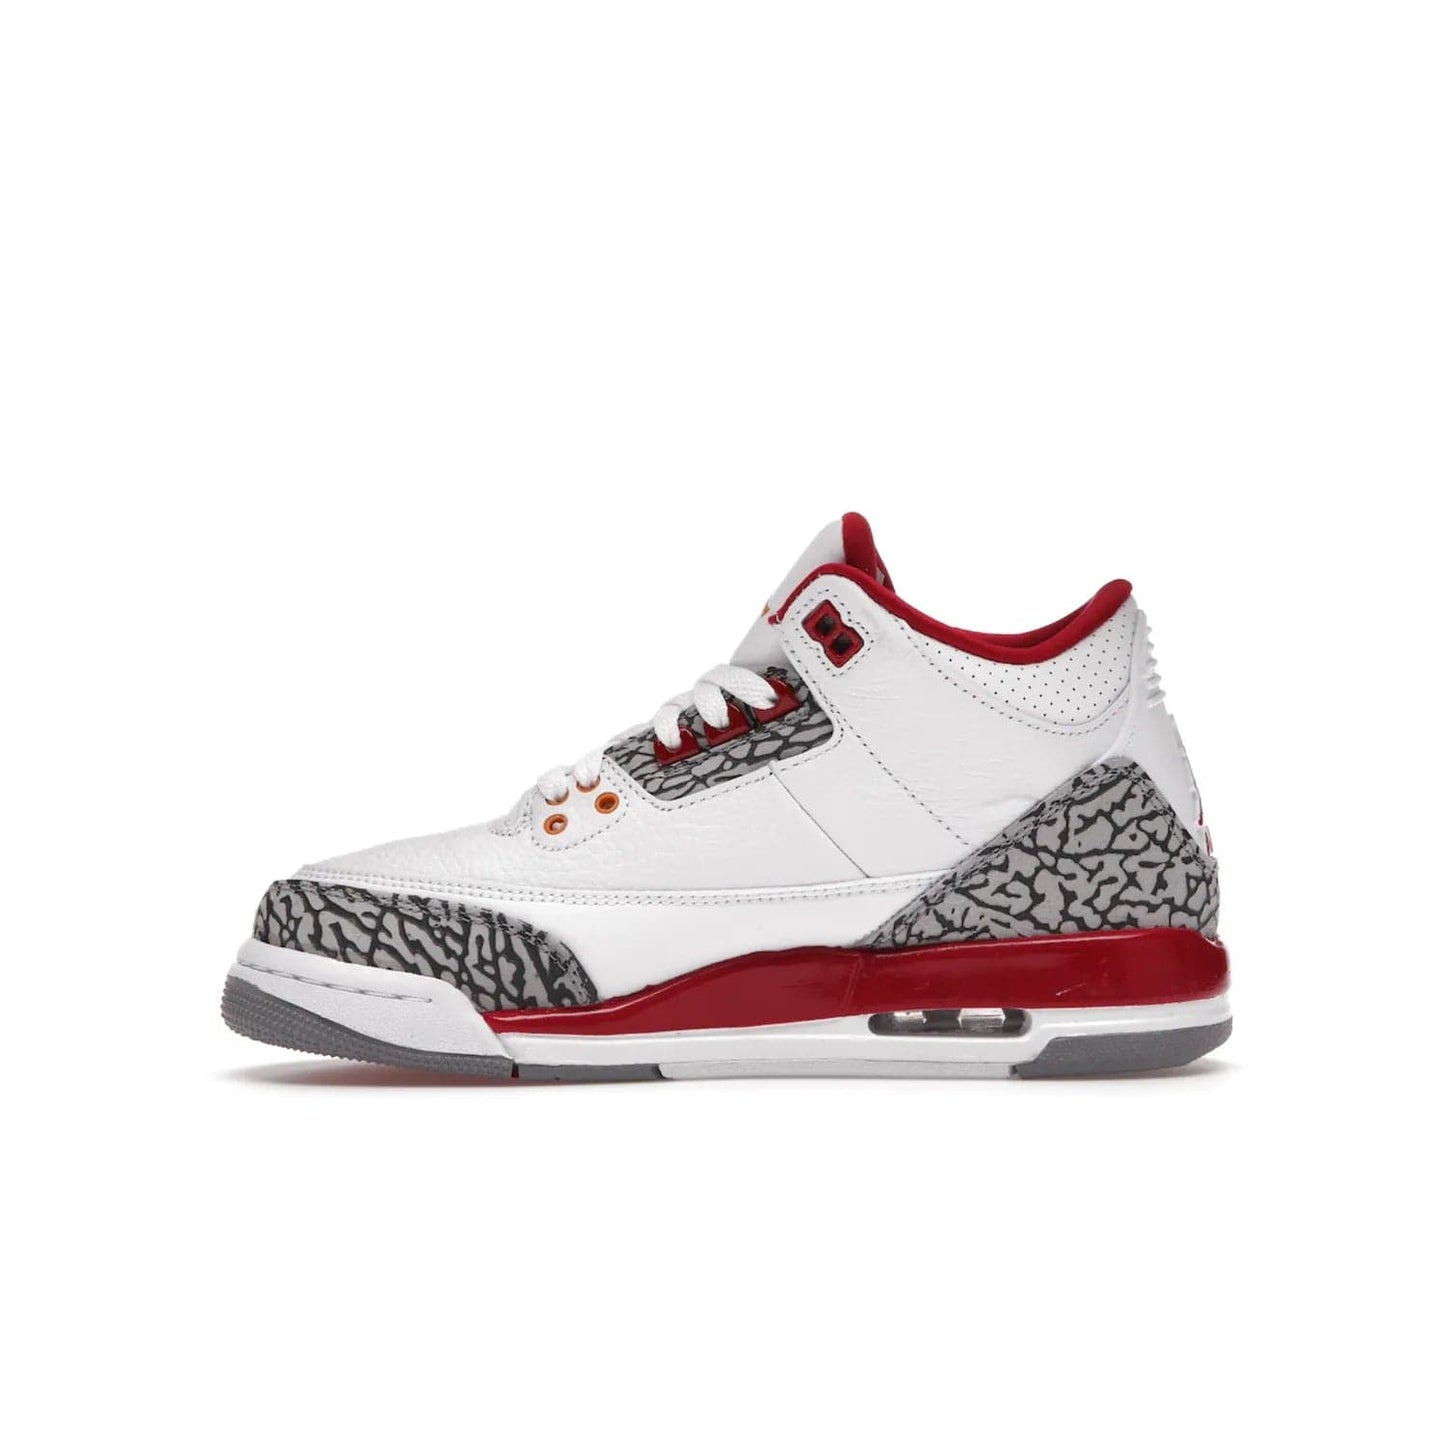 Jordan 3 Retro Cardinal (GS) - Image 19 - Only at www.BallersClubKickz.com - Shop the kid-sized Air Jordan 3 Retro Cardinal GS, released Feb 2022. White tumbled leather upper, light curry accenting, cement grey and classic red details throughout. Visible Air cushioning, midsole, and an eye-catching outsole. Show off your style with this fashionable streetwear silhouette.